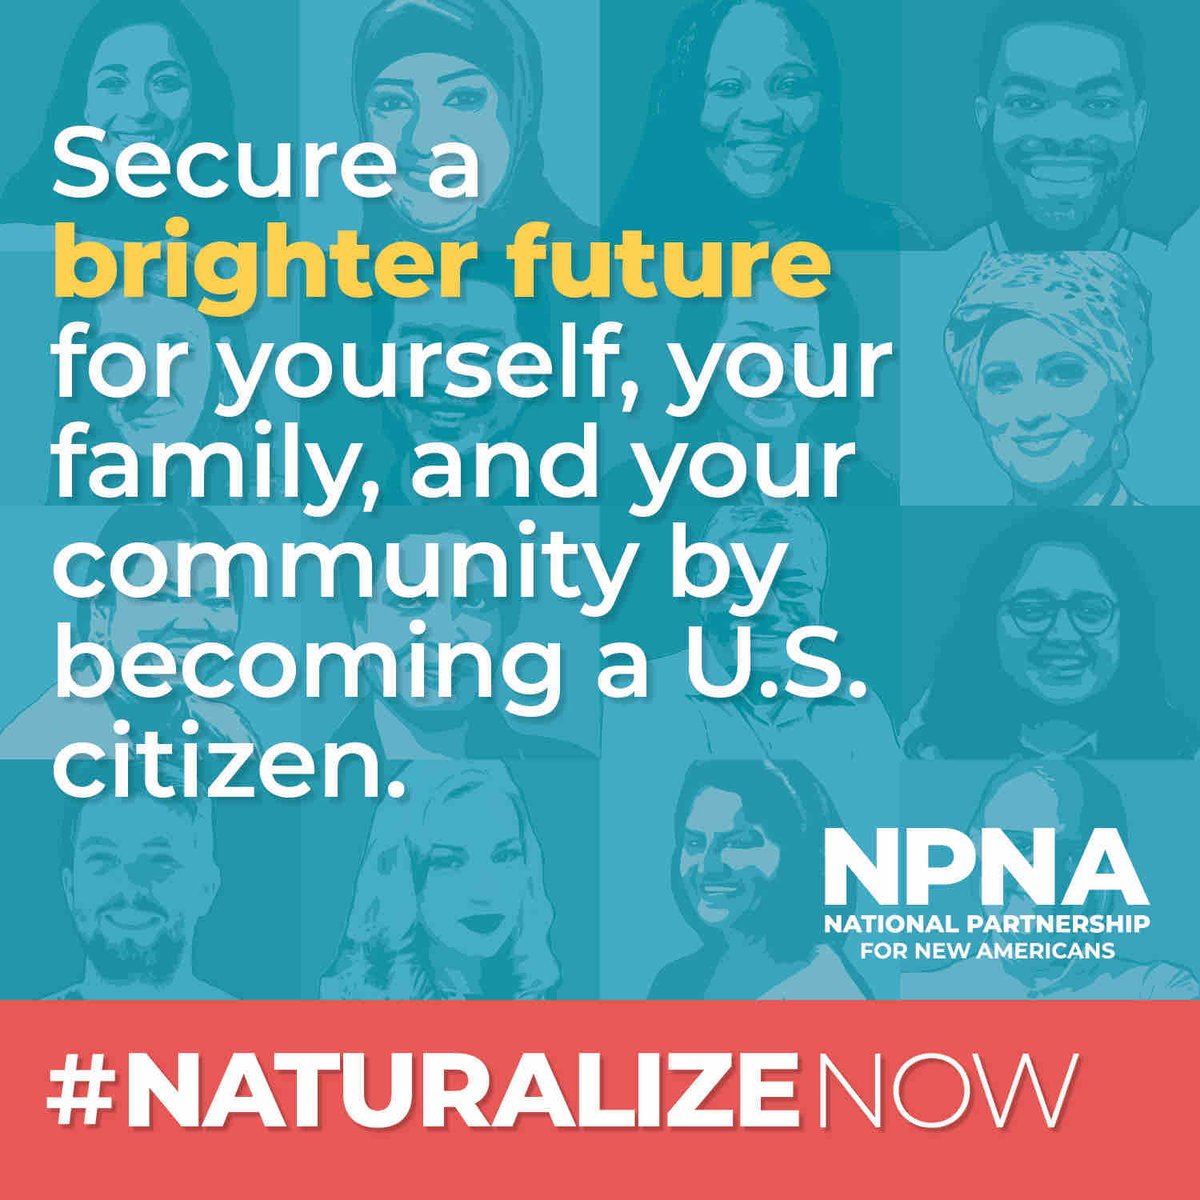 Are you eligible to become a U.S. citizen? If so, consider taking the step towards naturalization and gain: 🗳️ The right to vote 👨🏽‍⚕️ Better work opportunities 🏡 The chance to own a home Learn more & start your journey today: houston.naturalizenow.org #NaturalizeNOW